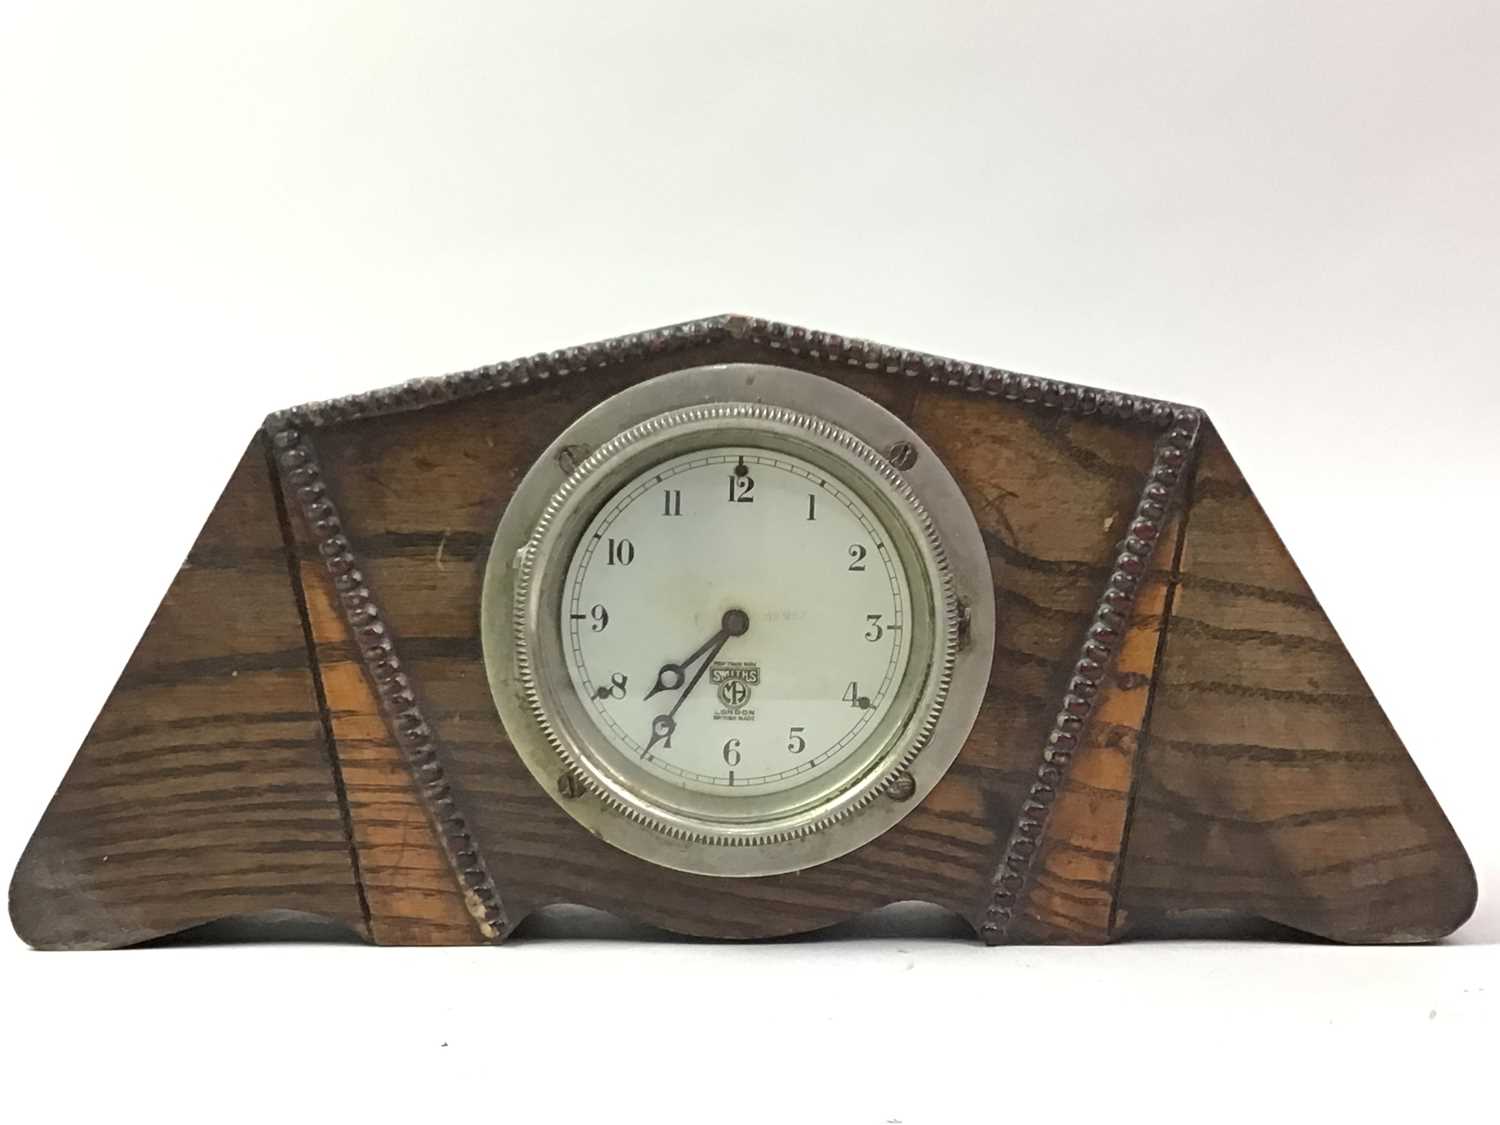 SMITH'S ART DECO STYLE MANTEL CLOCK, AND OTHER ITEMS